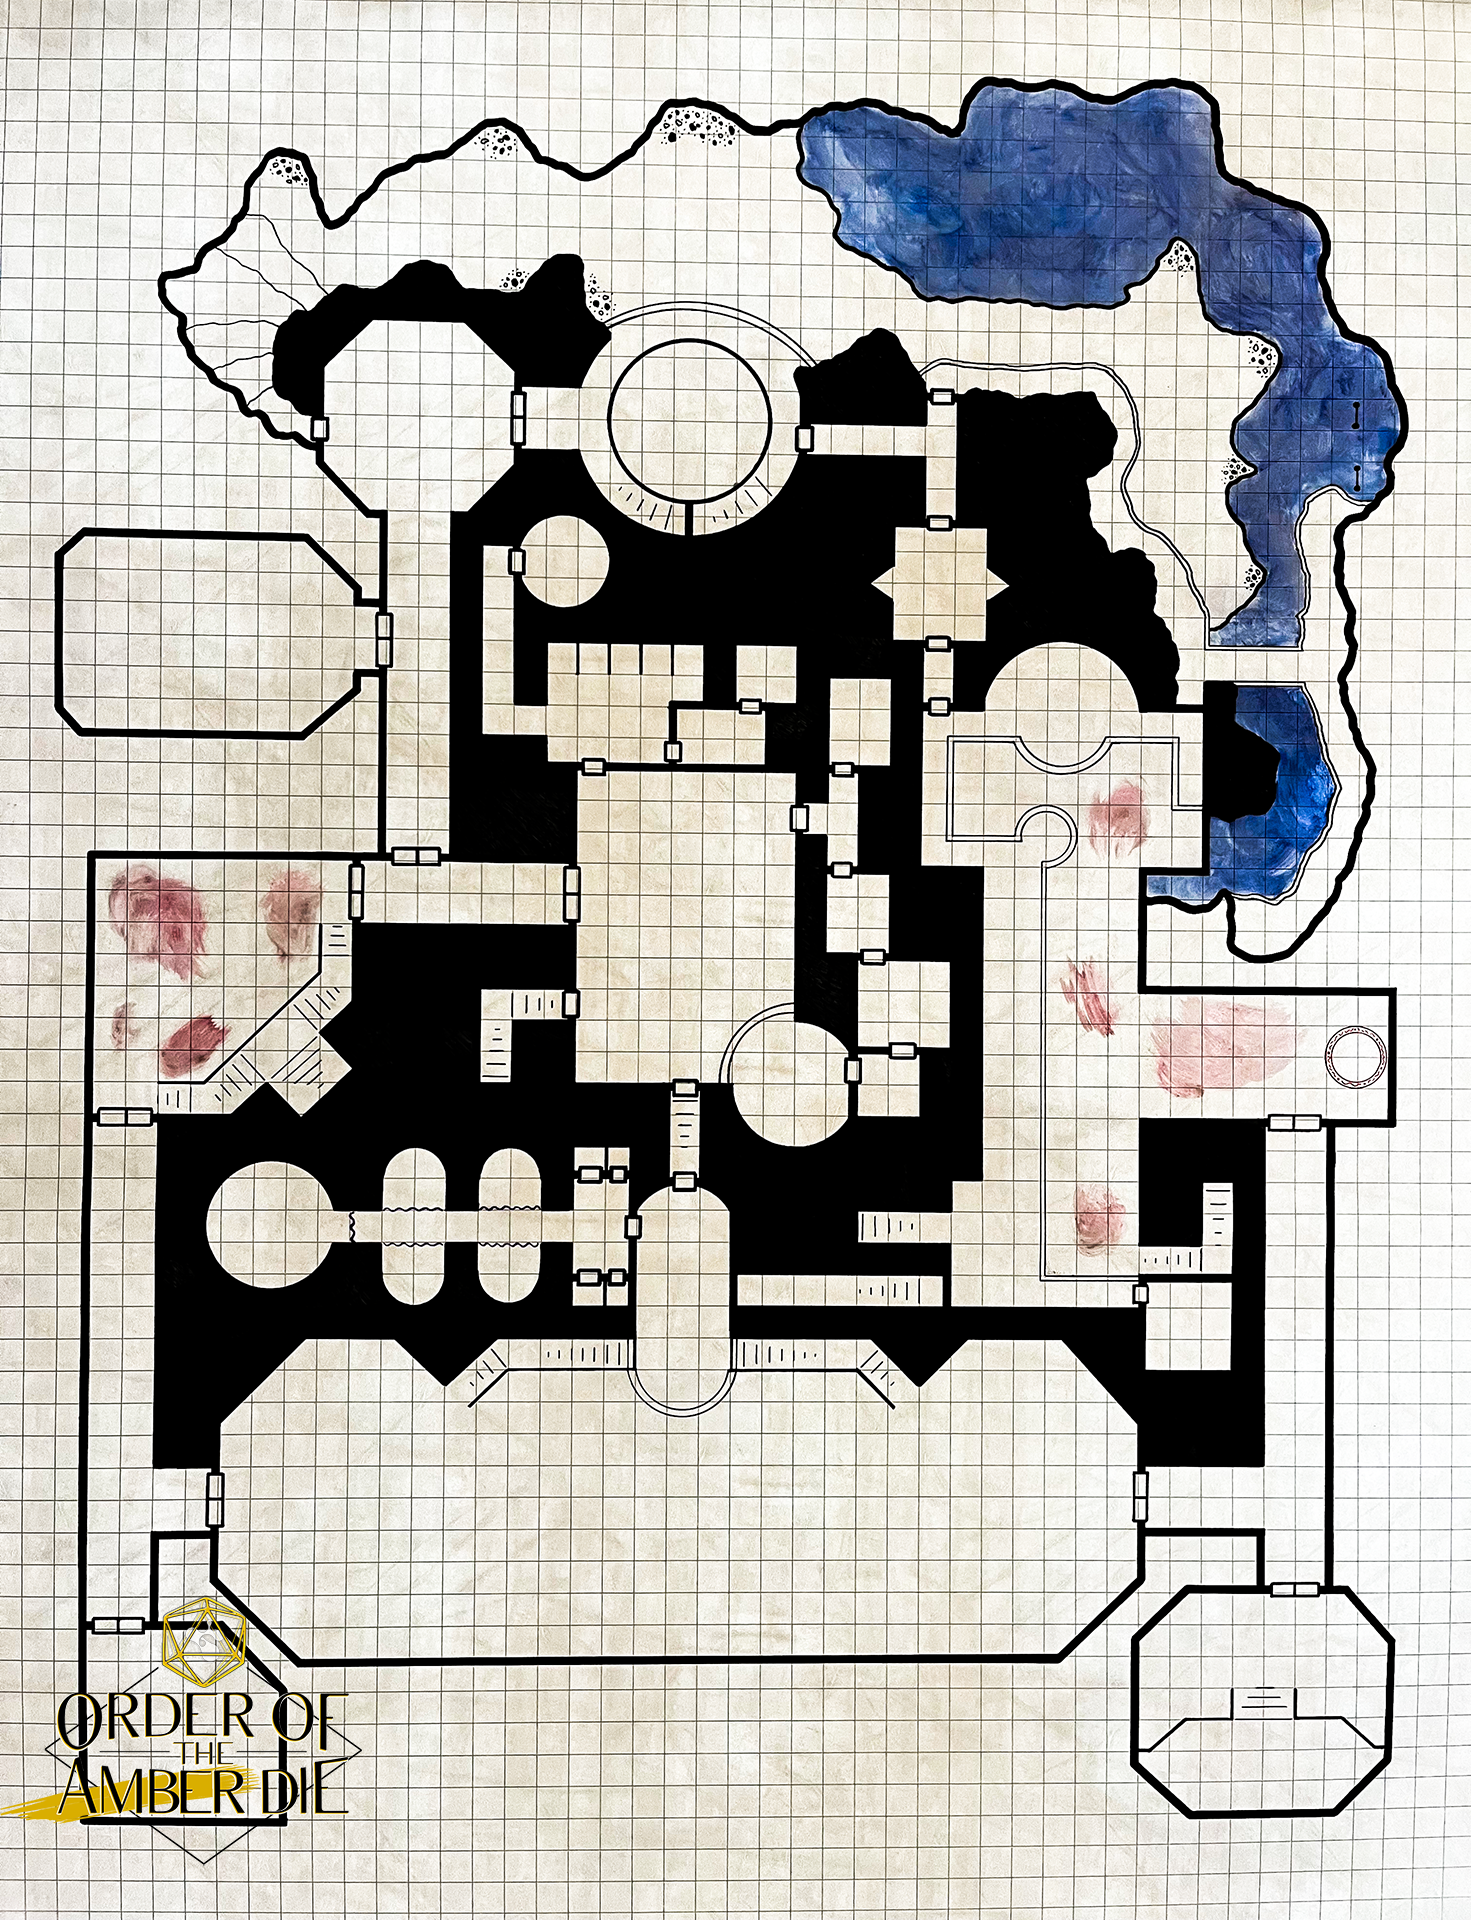 A top down view of a square tiled dungeon map